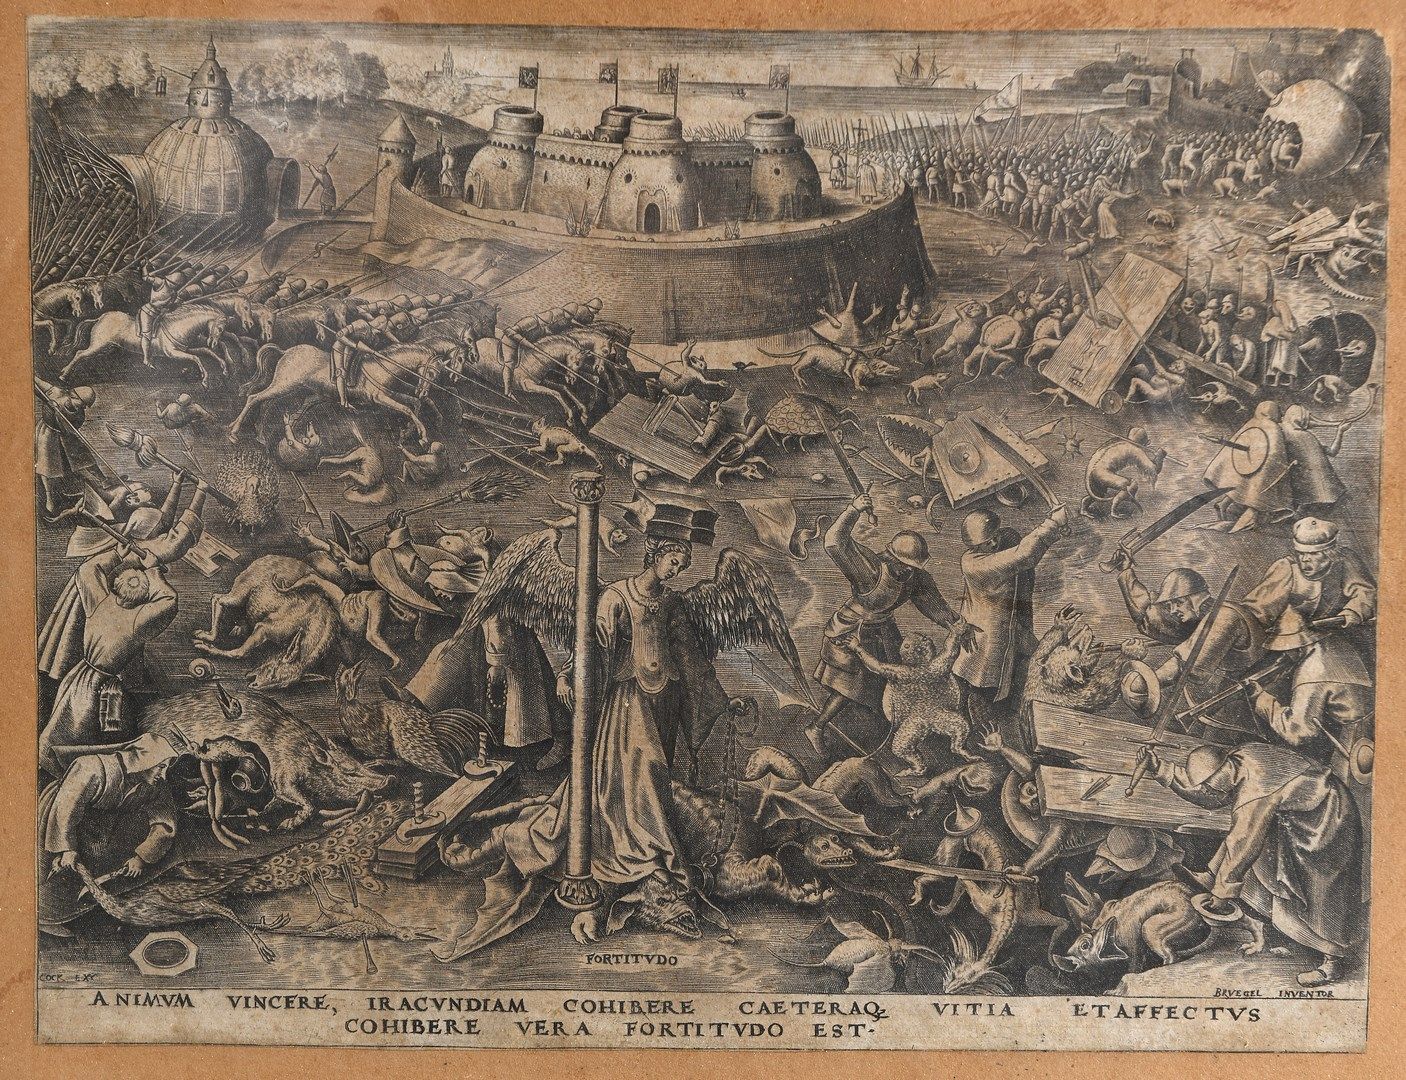 Null Peter BRUEGHEL (c.1525-c.1569)

FORTITUDO

Plate from the series of the Sev&hellip;